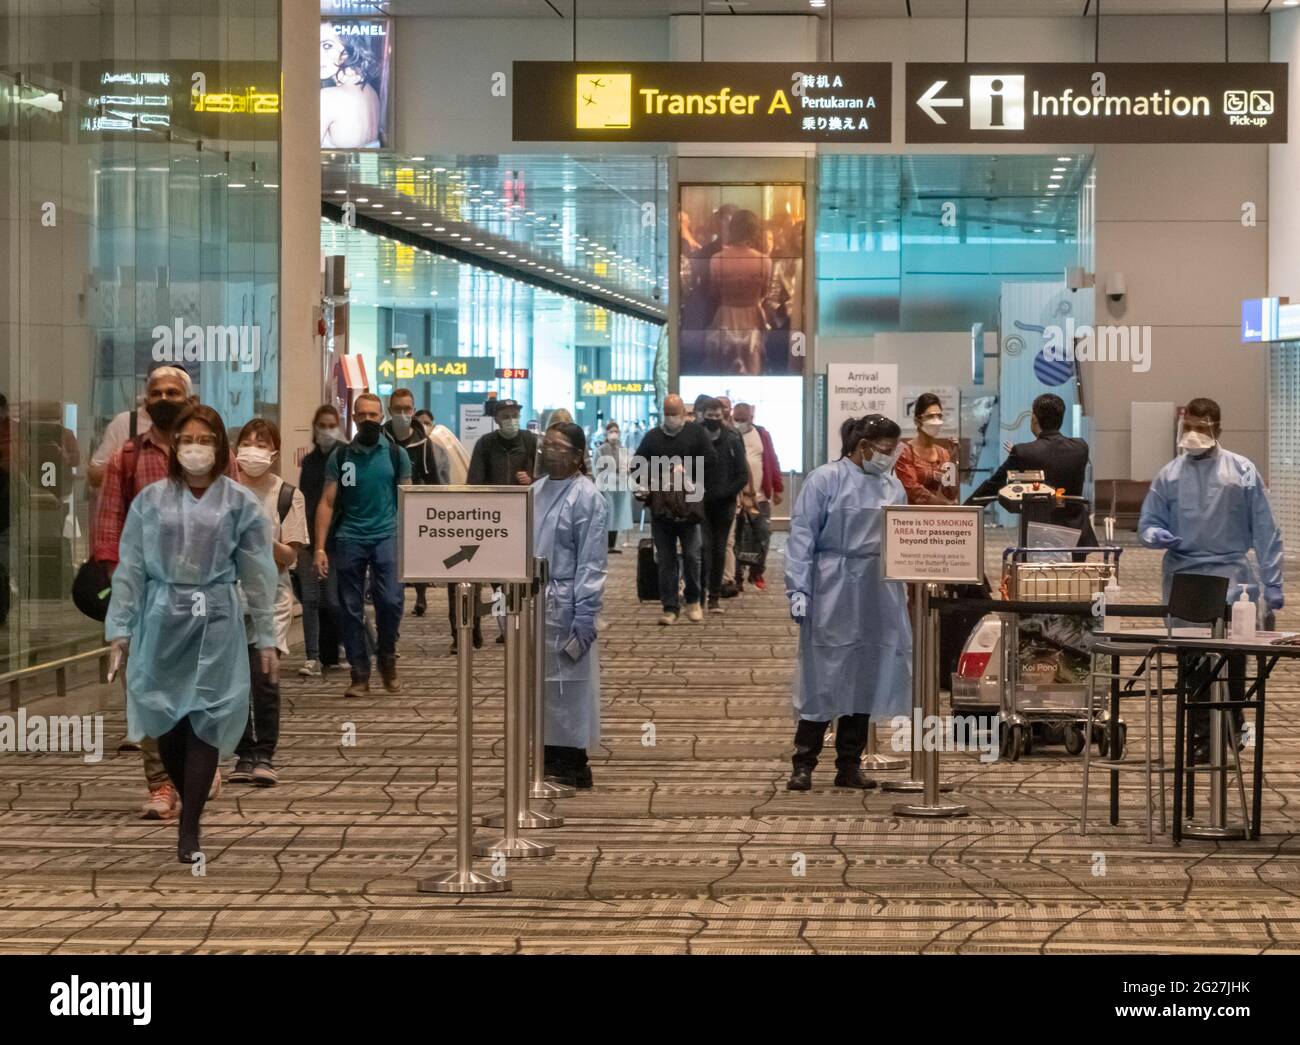 Singapore, 8 June, 2021 - Passengers are escorted by a airport staff member (left) through Singapore 's Changi Airport as other staff check Covid-19 paperwork and passengers body temperatures. All airport staff wear PPE smocks , masks and glasses in the arrival and departure terminals. Before the Covd-19 pandemic, in 2019 Changi Airport was the seventh busiest airport by international passenger traffic in the world and the third busiest in Asia. Credit: Rob Taggart/Alamy Live News Stock Photo